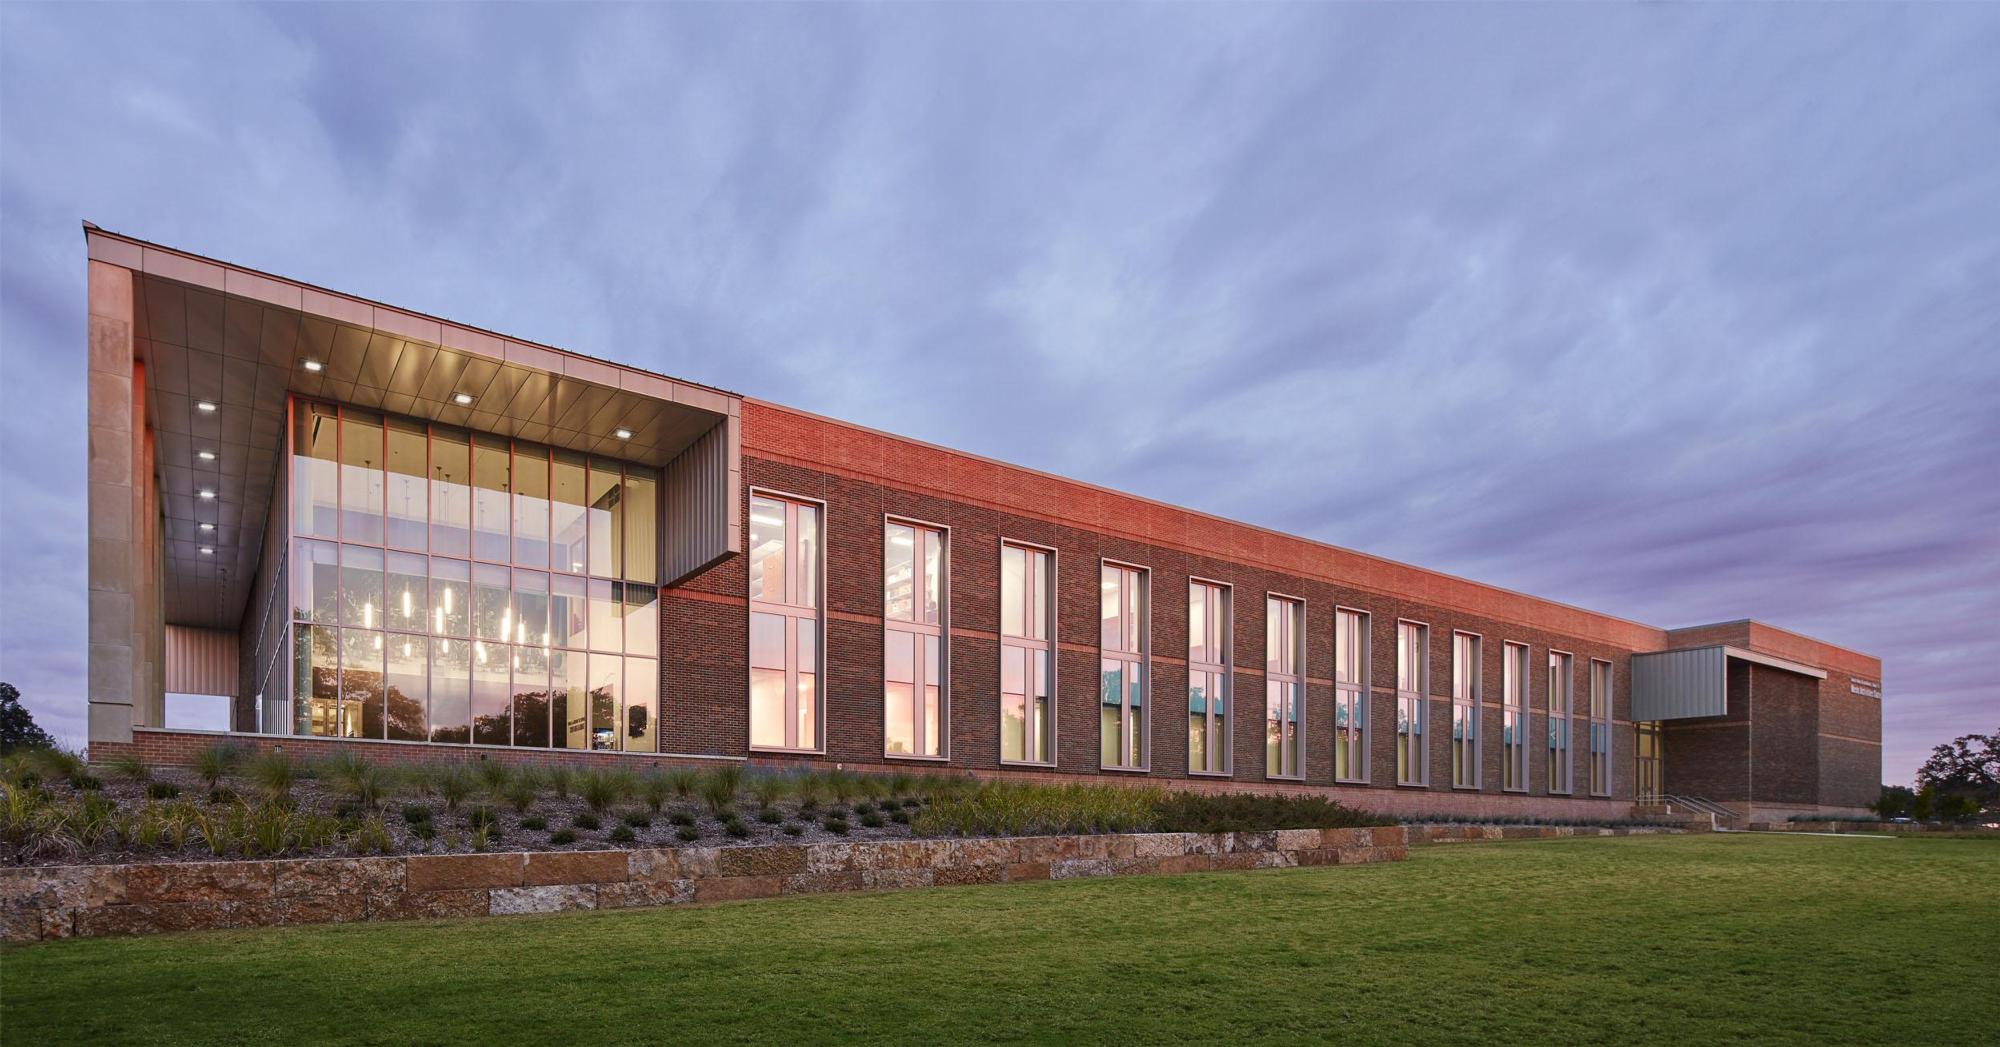 Exterior image of the red bricked Music Activities Center - Texas A&M University and the green lawn outside it